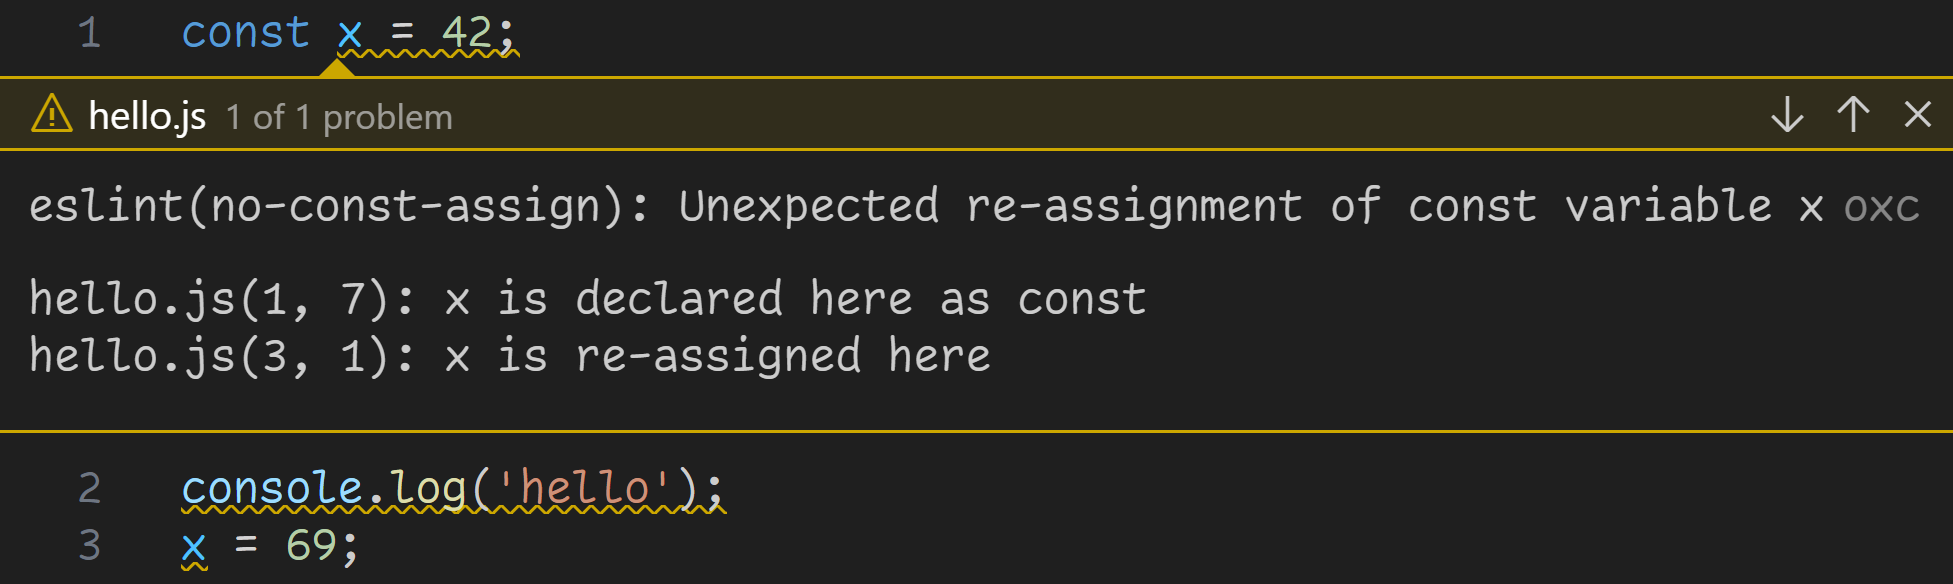 no-const-assign warning reported by Oxc's Visual Studio Code extension spanning multiple lines